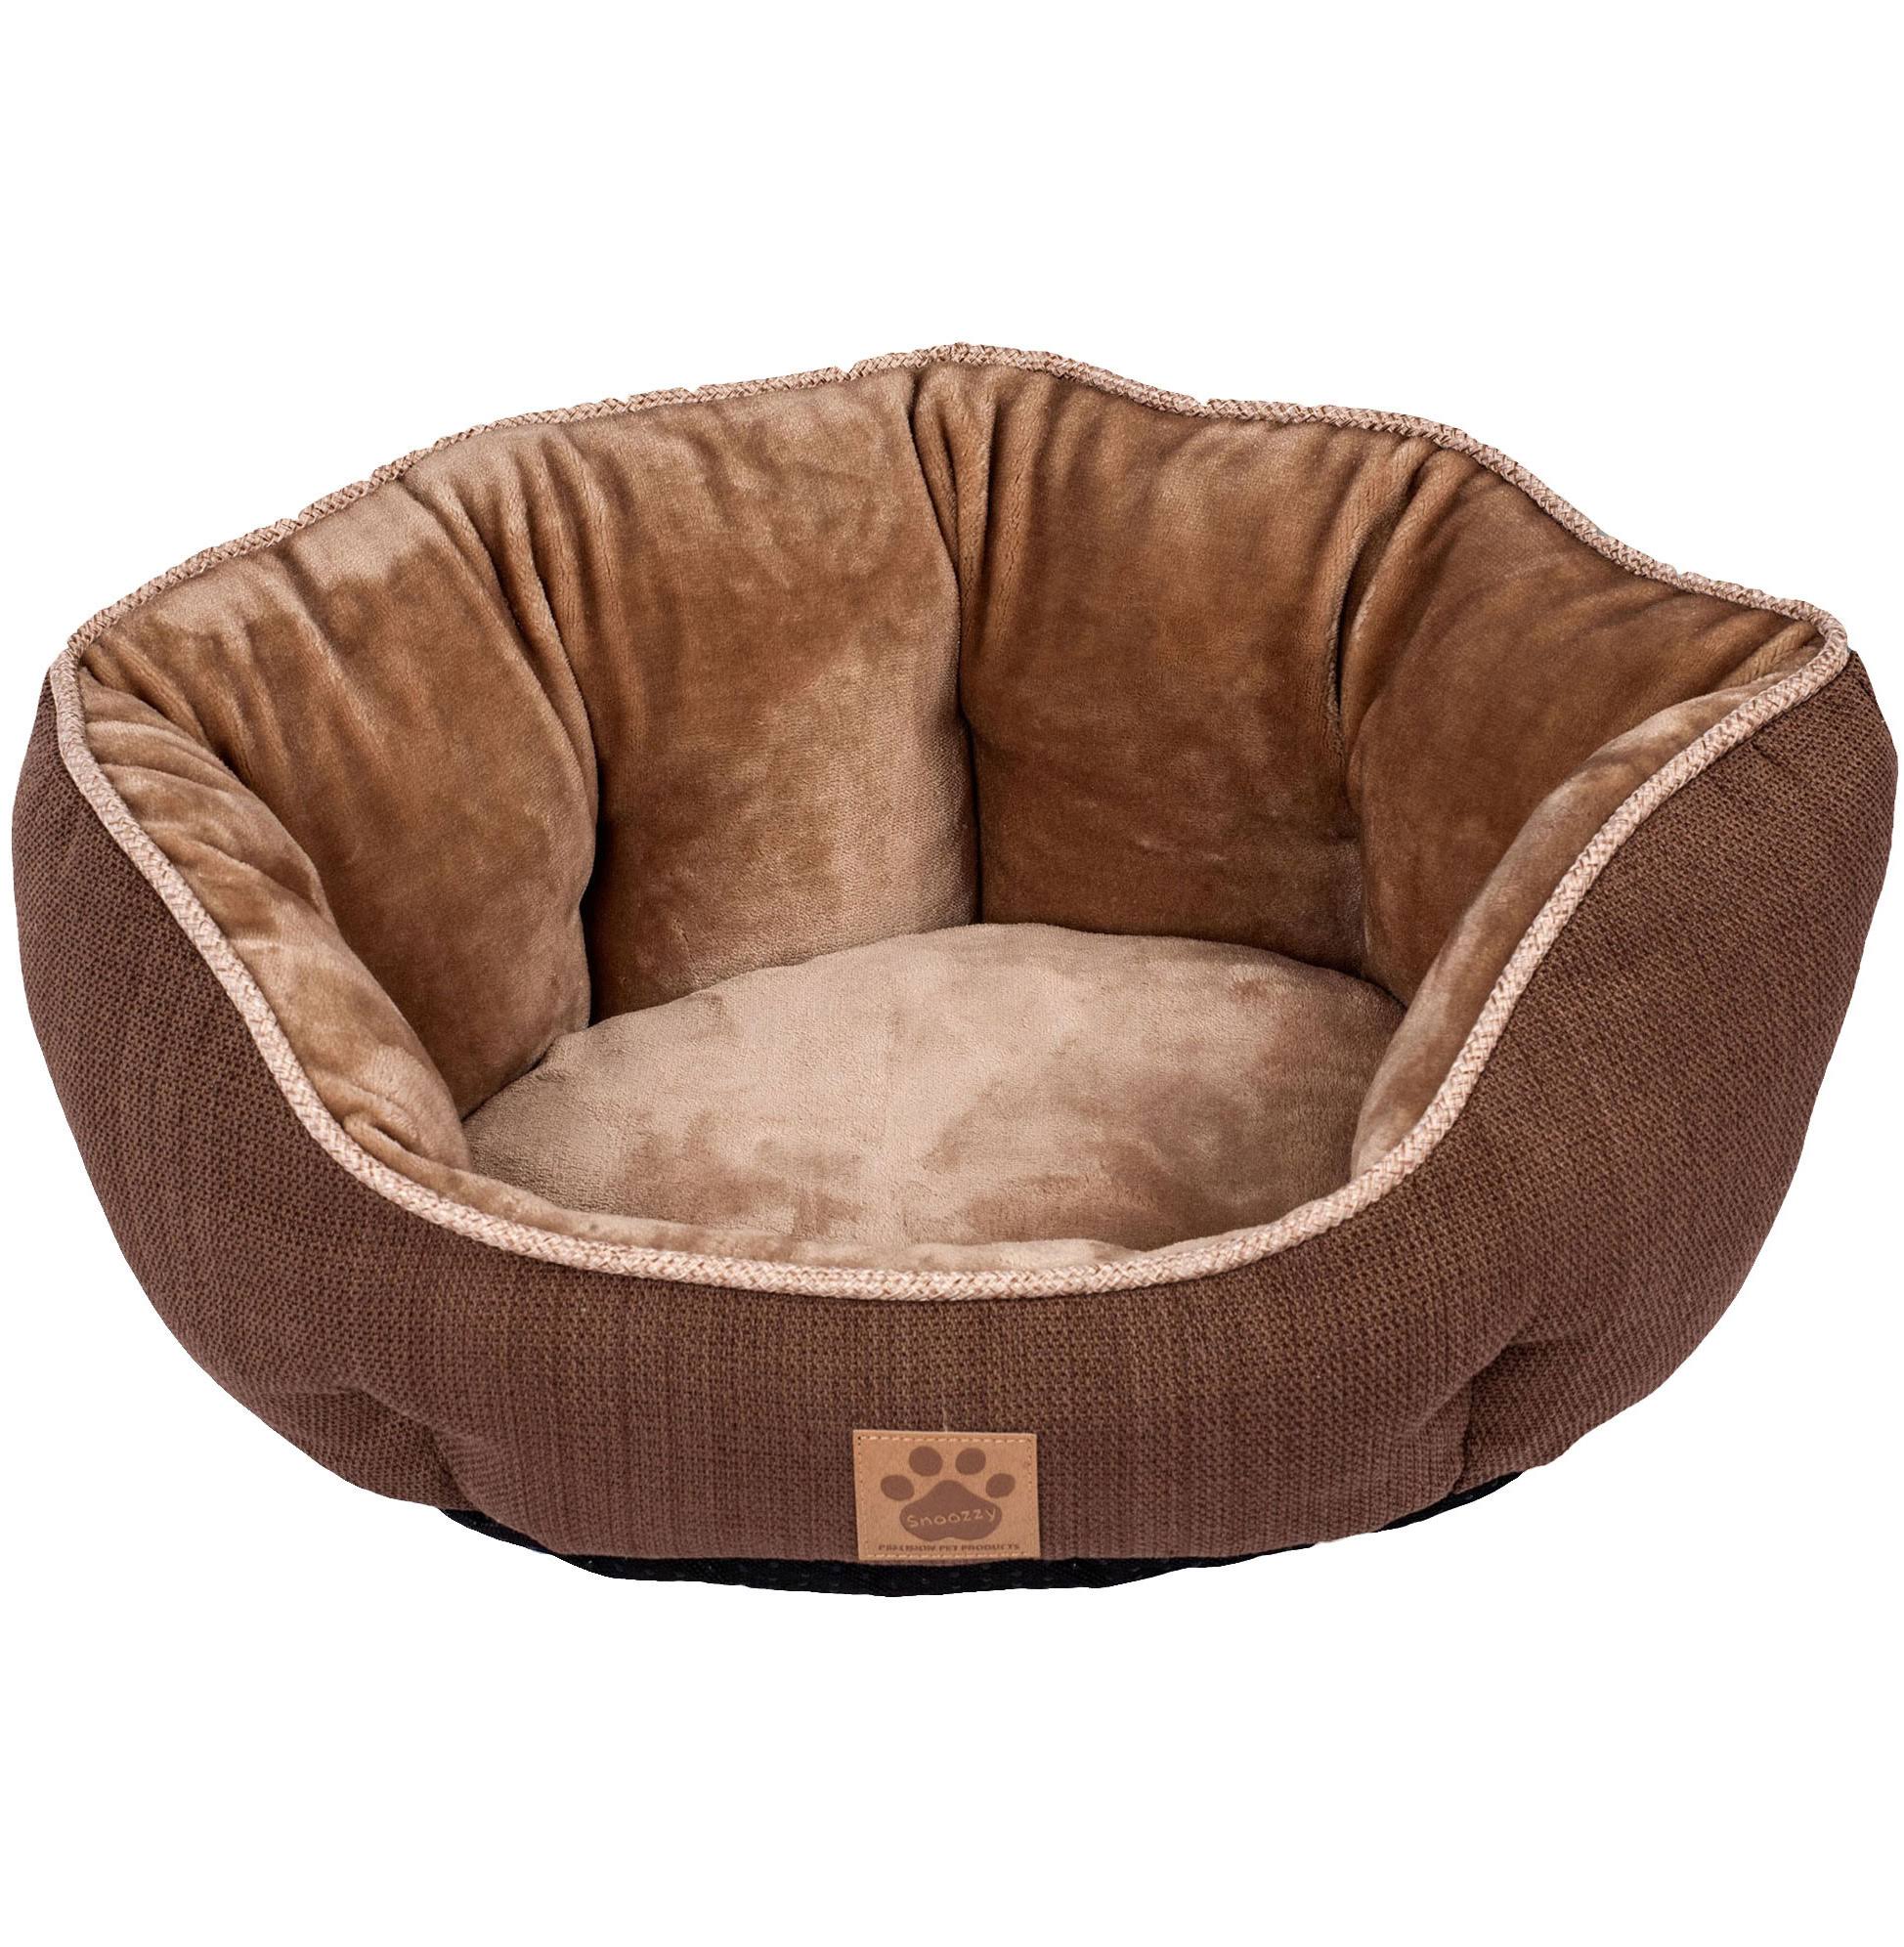 Precision Snoozzy Rustic Elegance Clamshell Pet Bed - Brown